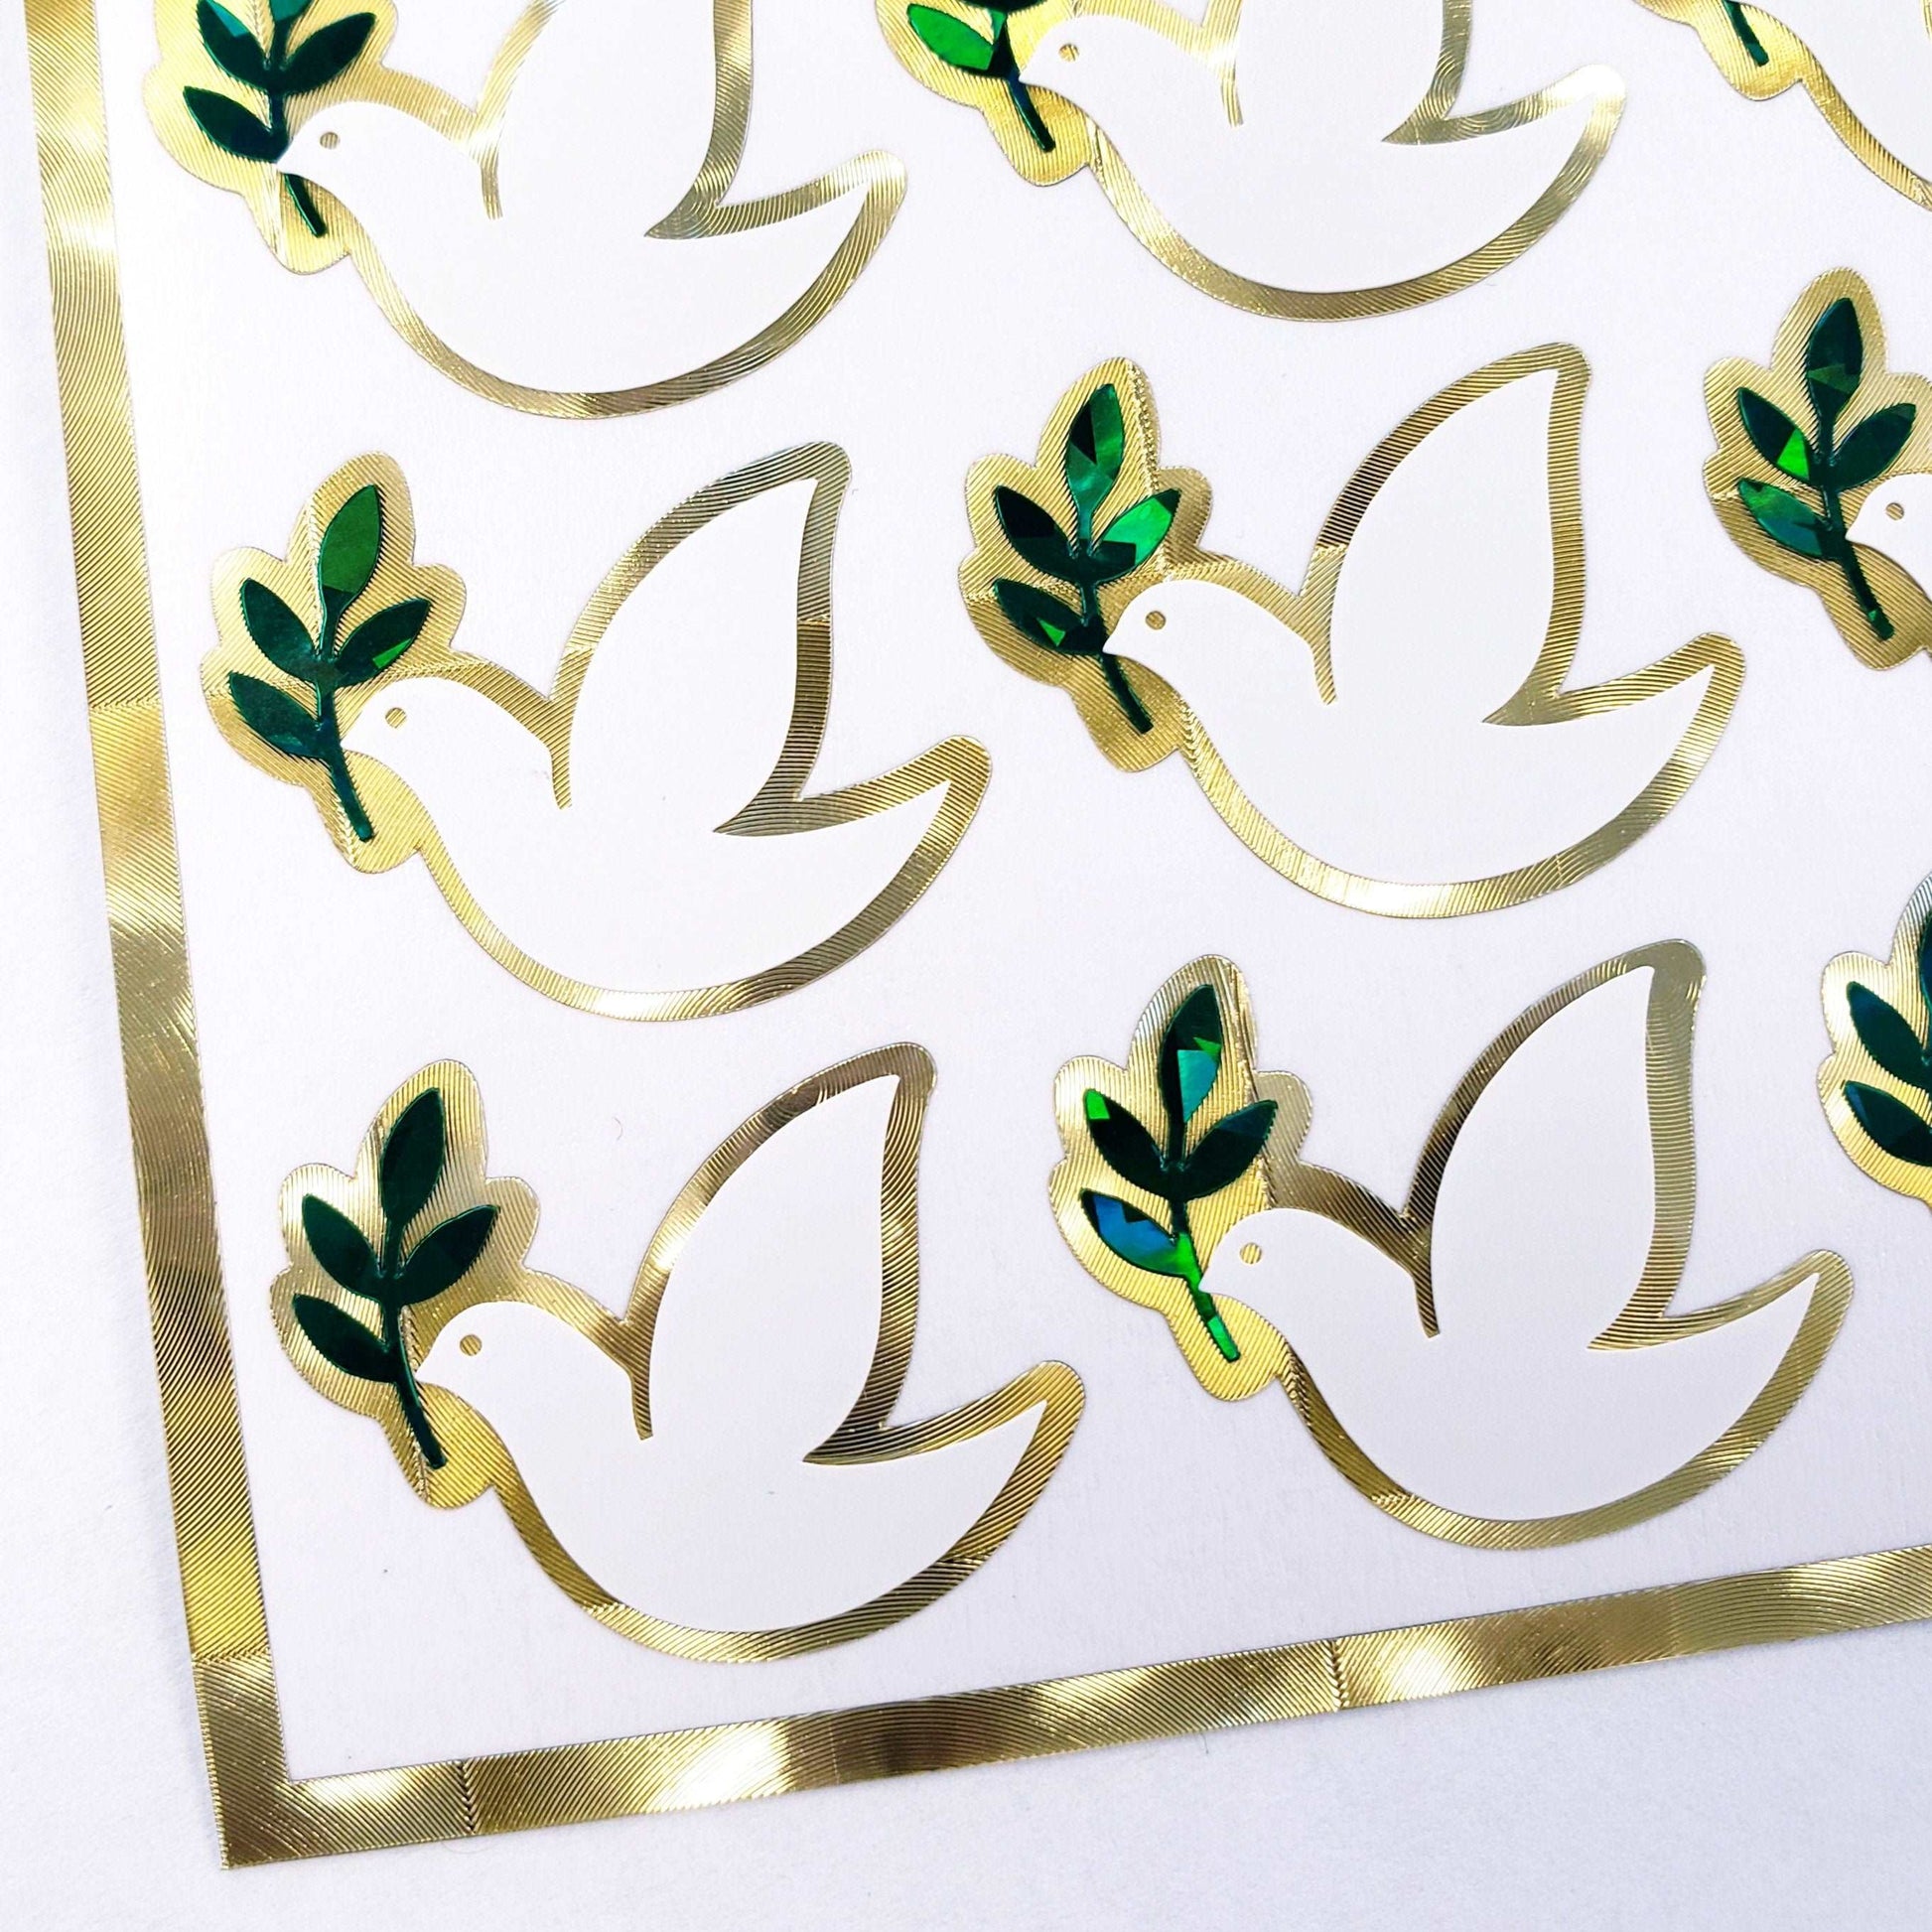 Peace Dove Stickers, set of 28 white and gold stickers for invitations, envelopes, memorial cards, planners, journals and crafts.